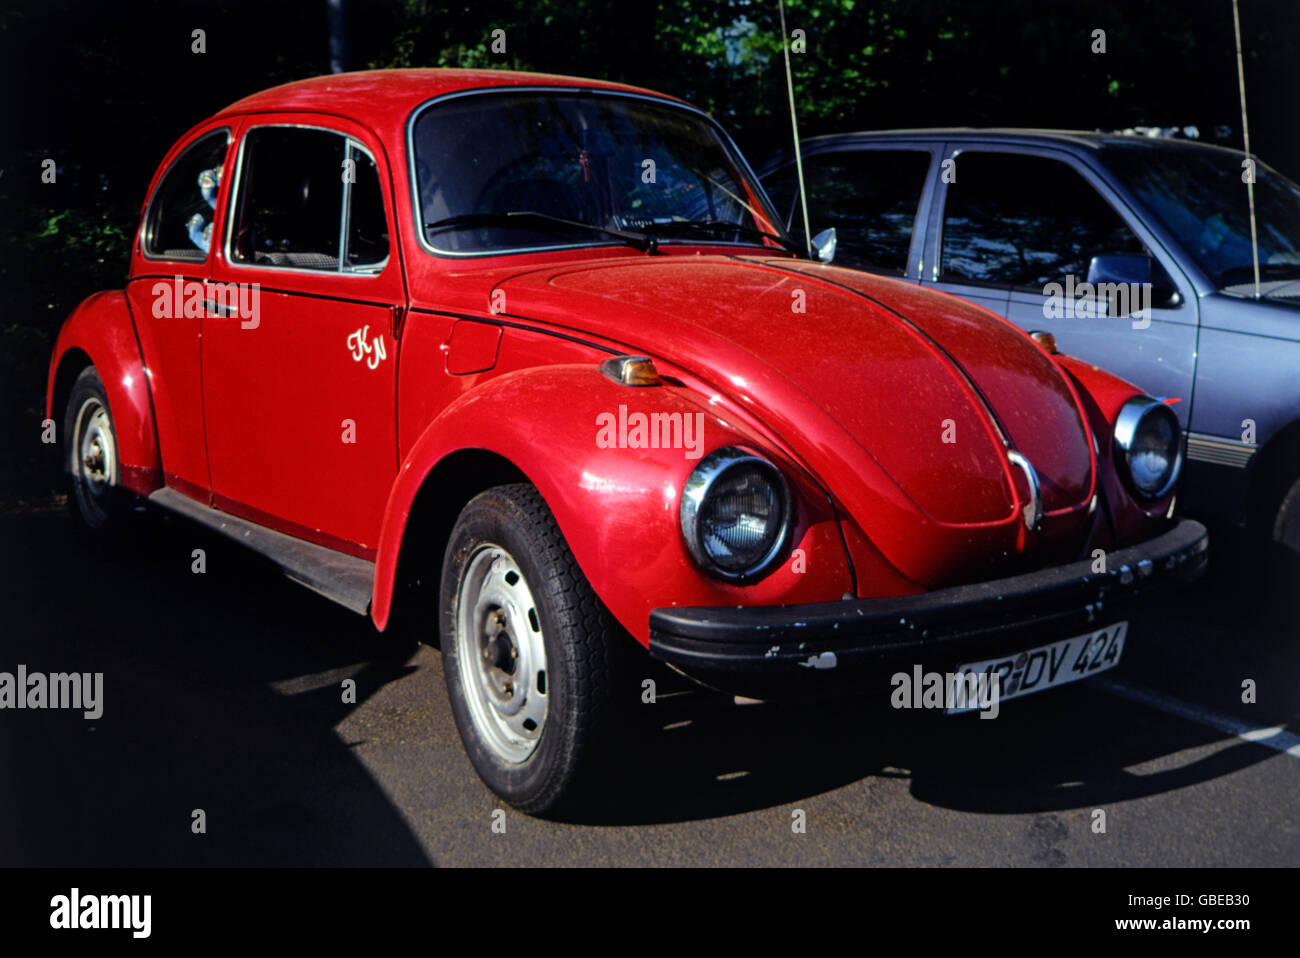 transport / transportation, car, vehicle variants, Volkswagen, red VW Beetle 1300, side view from ahead, Germany, circa 1990, motor car, auto, automobile, passenger car, motorcar, motorcars, autos, automobiles, passenger cars, parking, antenna, antennae, antennas, bumper, bumper bar, bumpers, bumper bars, bow, bows, front, fronts, headlight, 1990s, 90s, 1980s, 80s, 20th century, transport, transportation, car, cars, beetle, bug, beetles, bugs, historic, historical, Additional-Rights-Clearences-Not Available Stock Photo